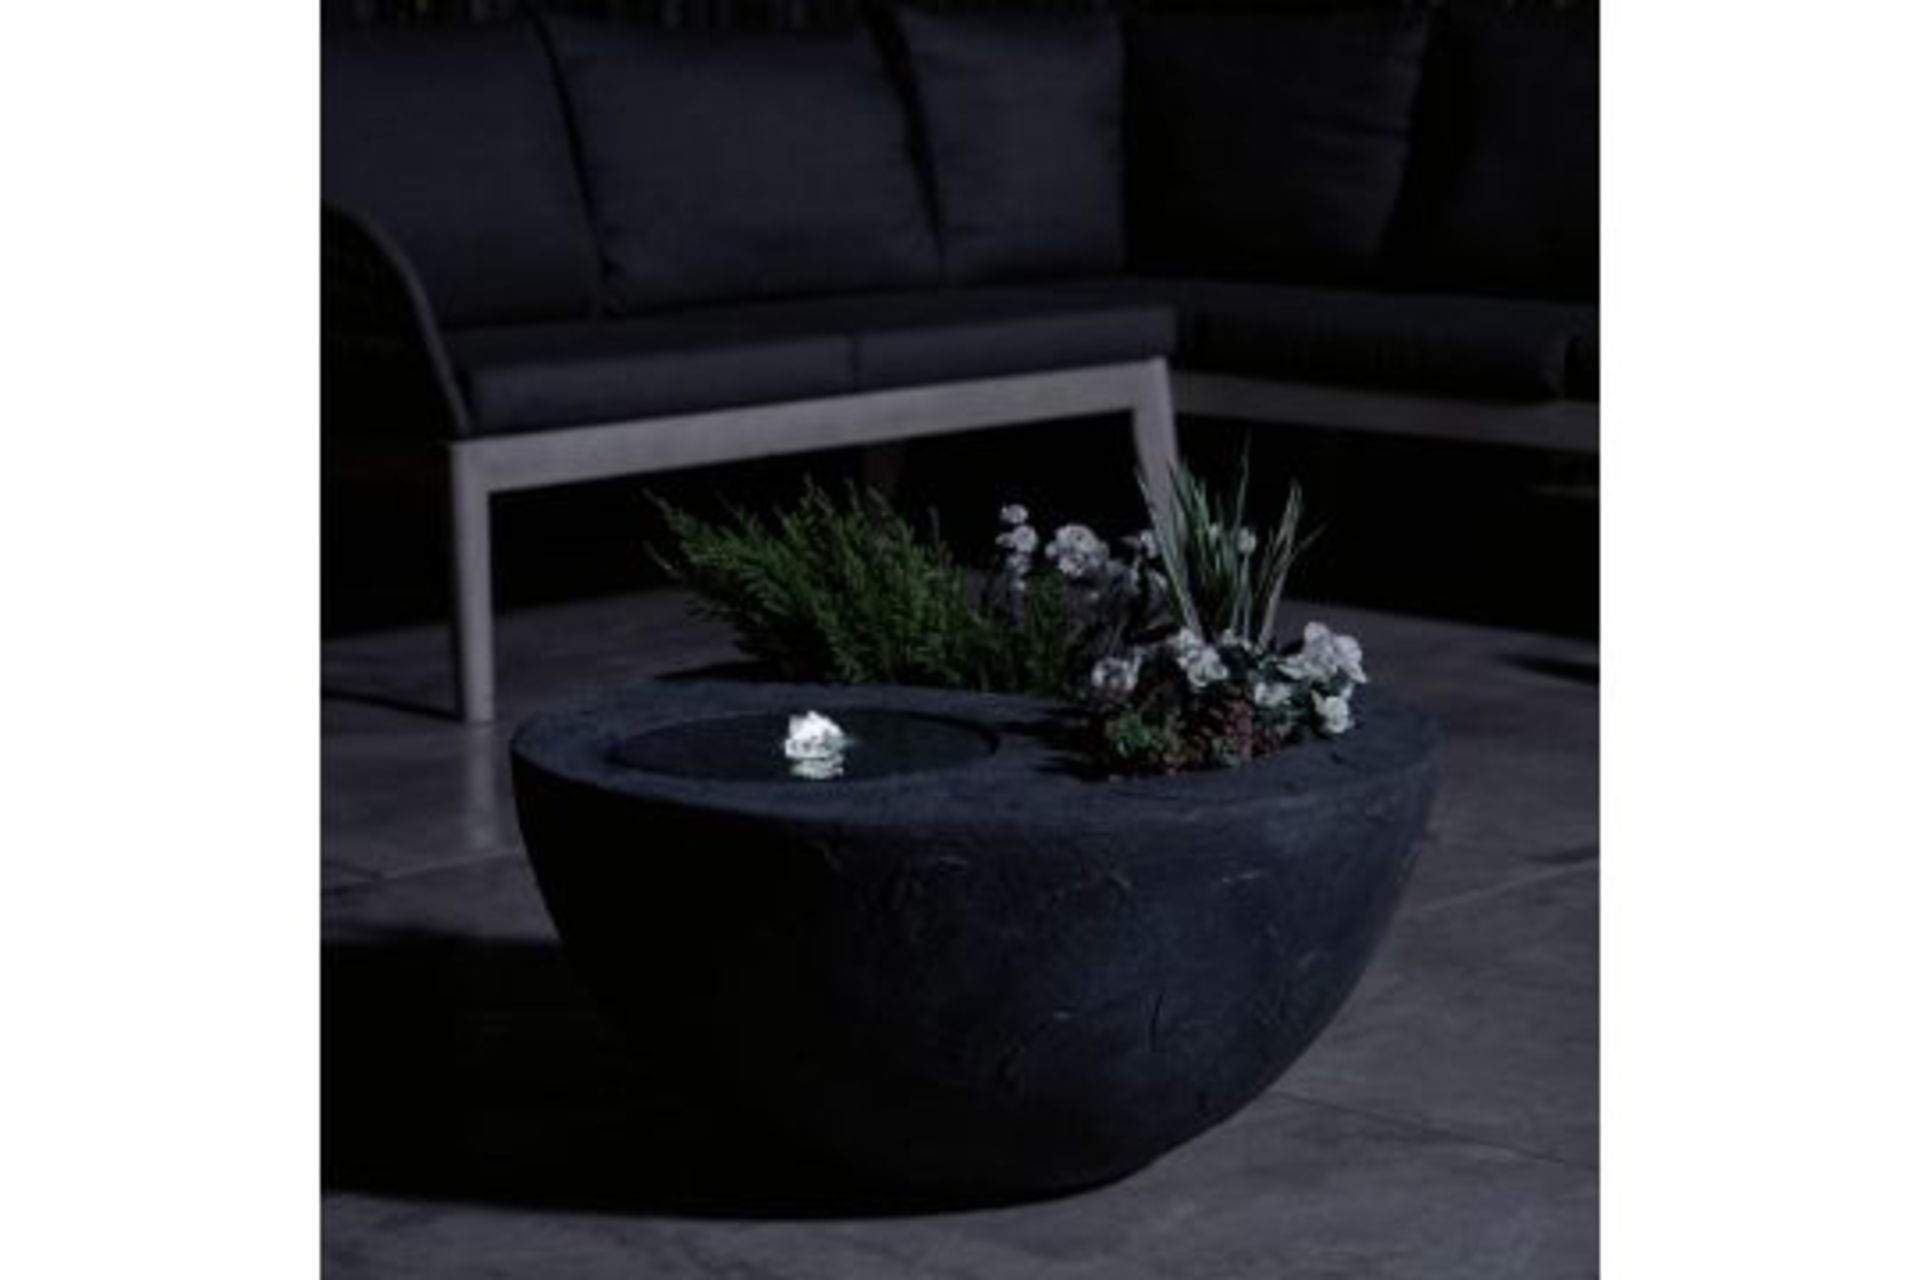 New & Boxed Dual Water Feature and Planter. RRP £299.99 (REF726) - Garden Bowl Design Planter, - Image 4 of 6